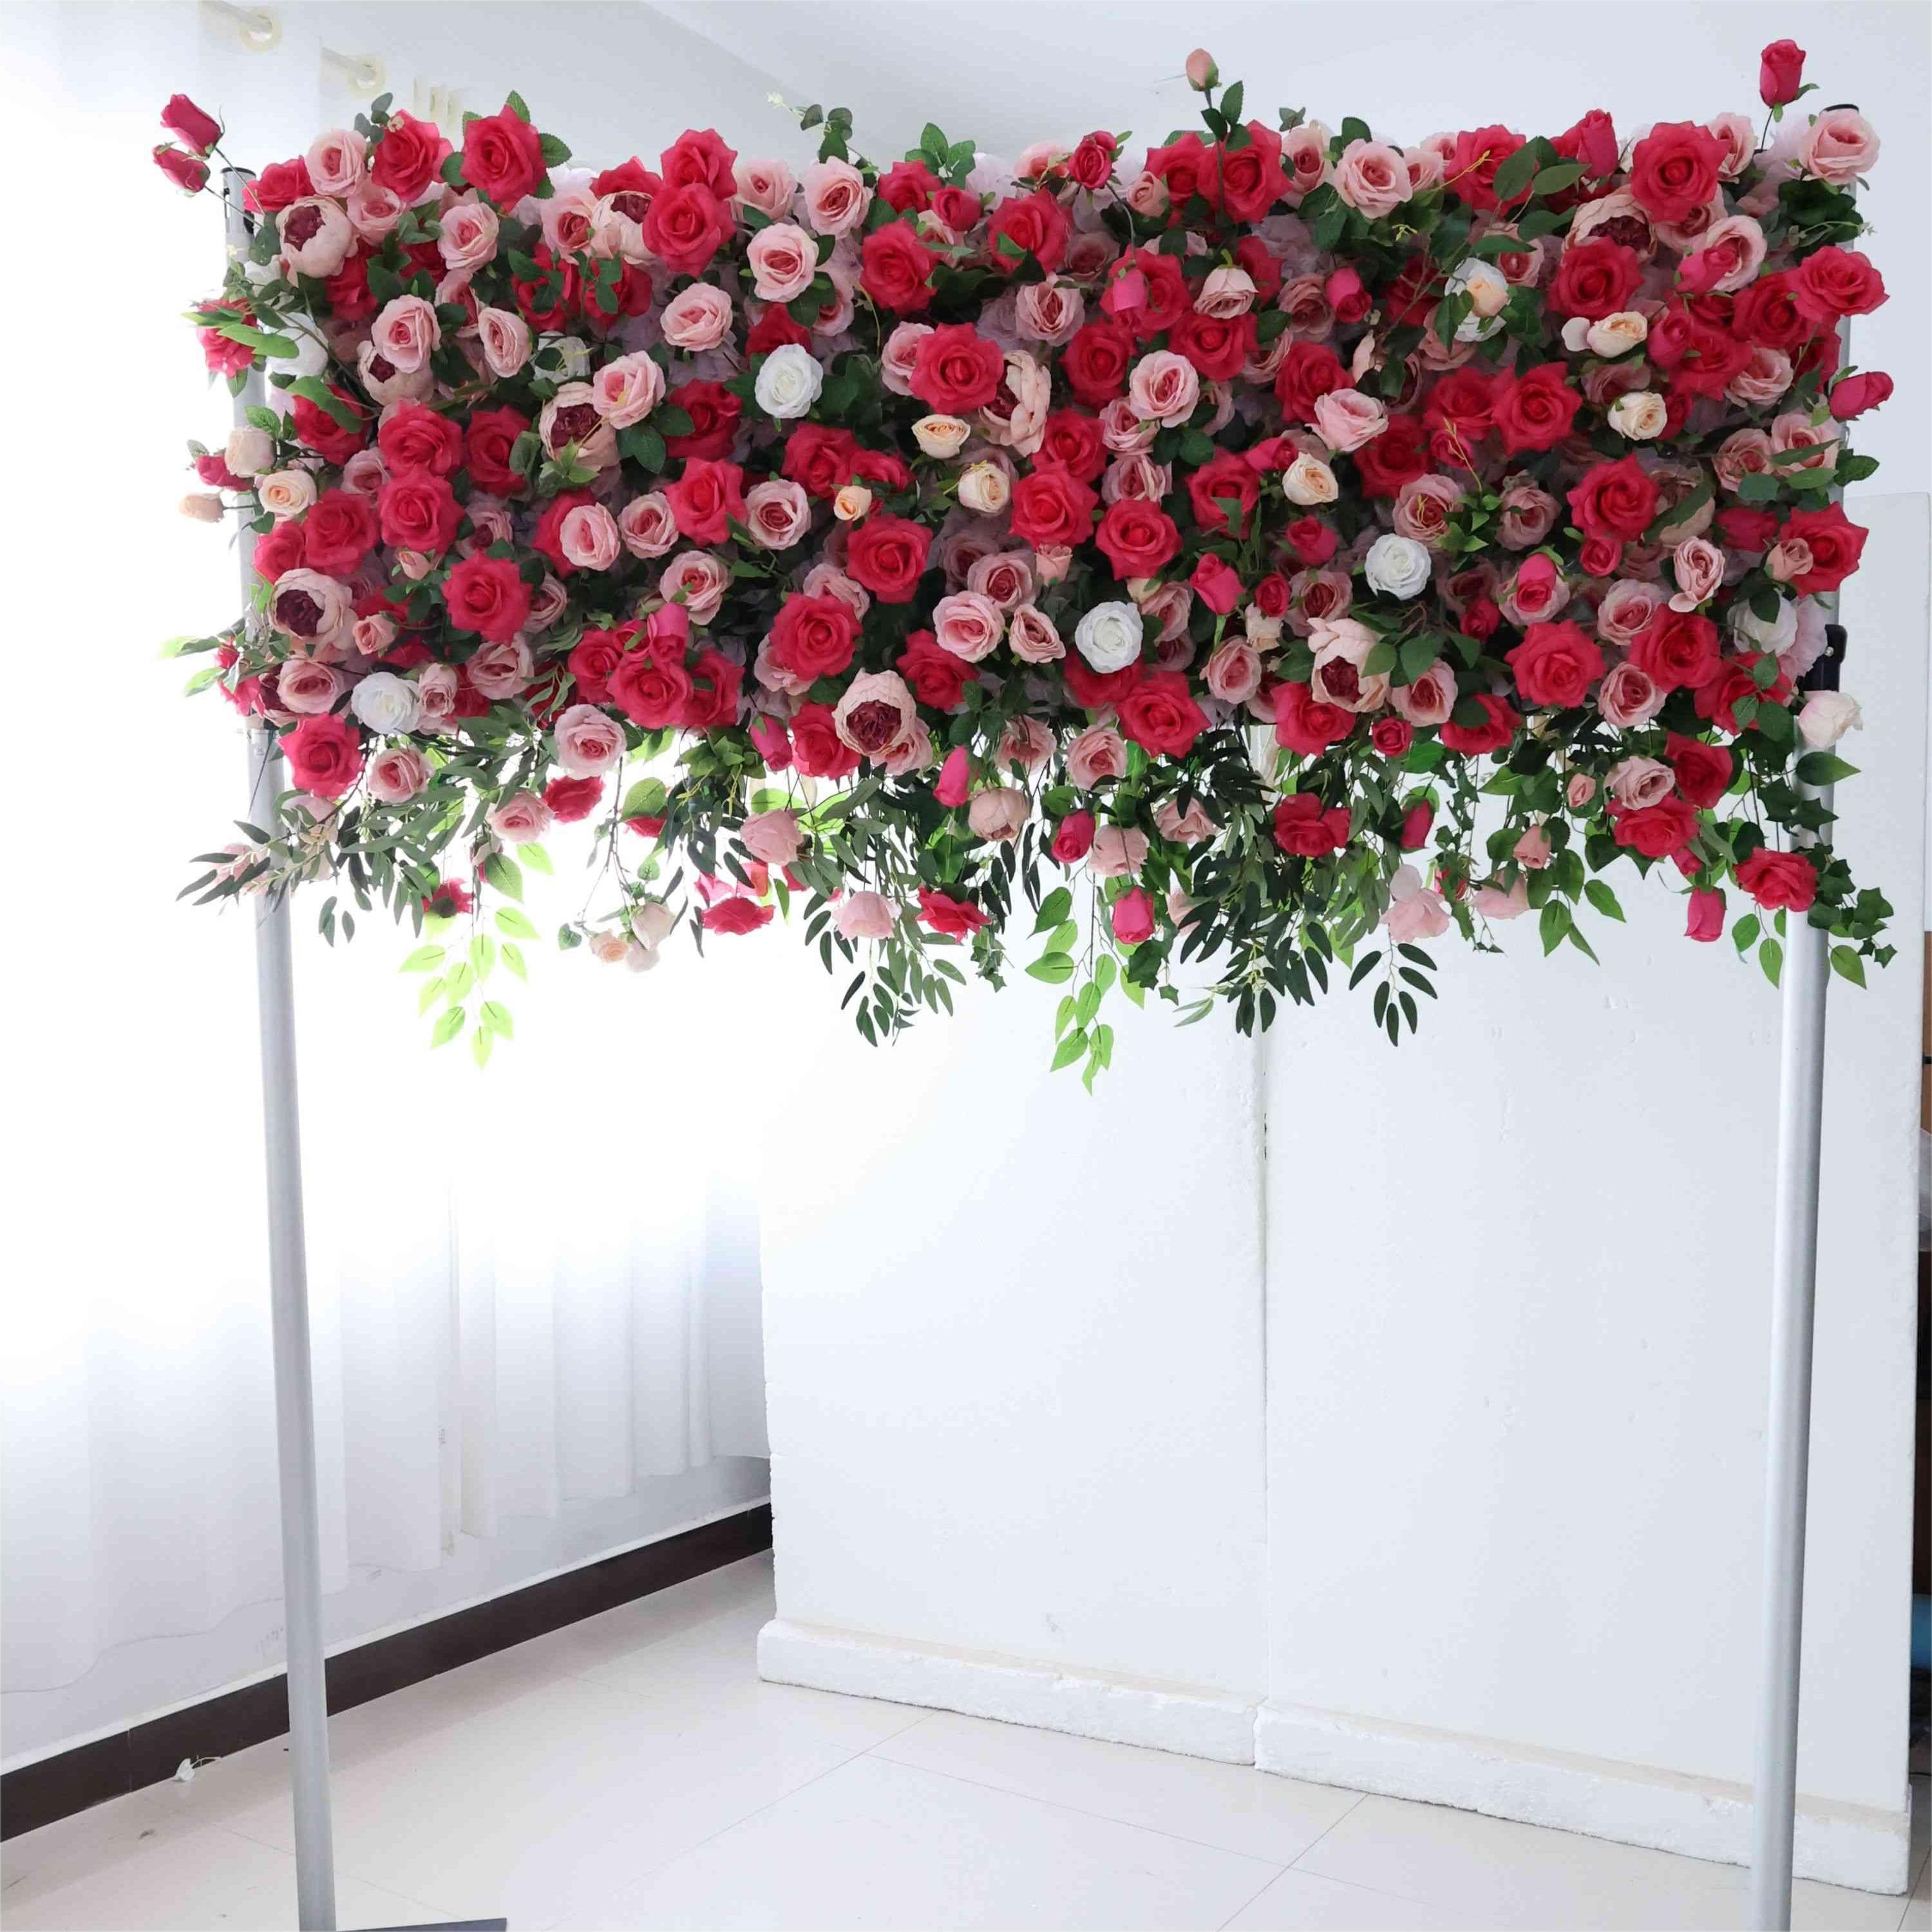 The pink red florals backdrop looks warm and romantic.